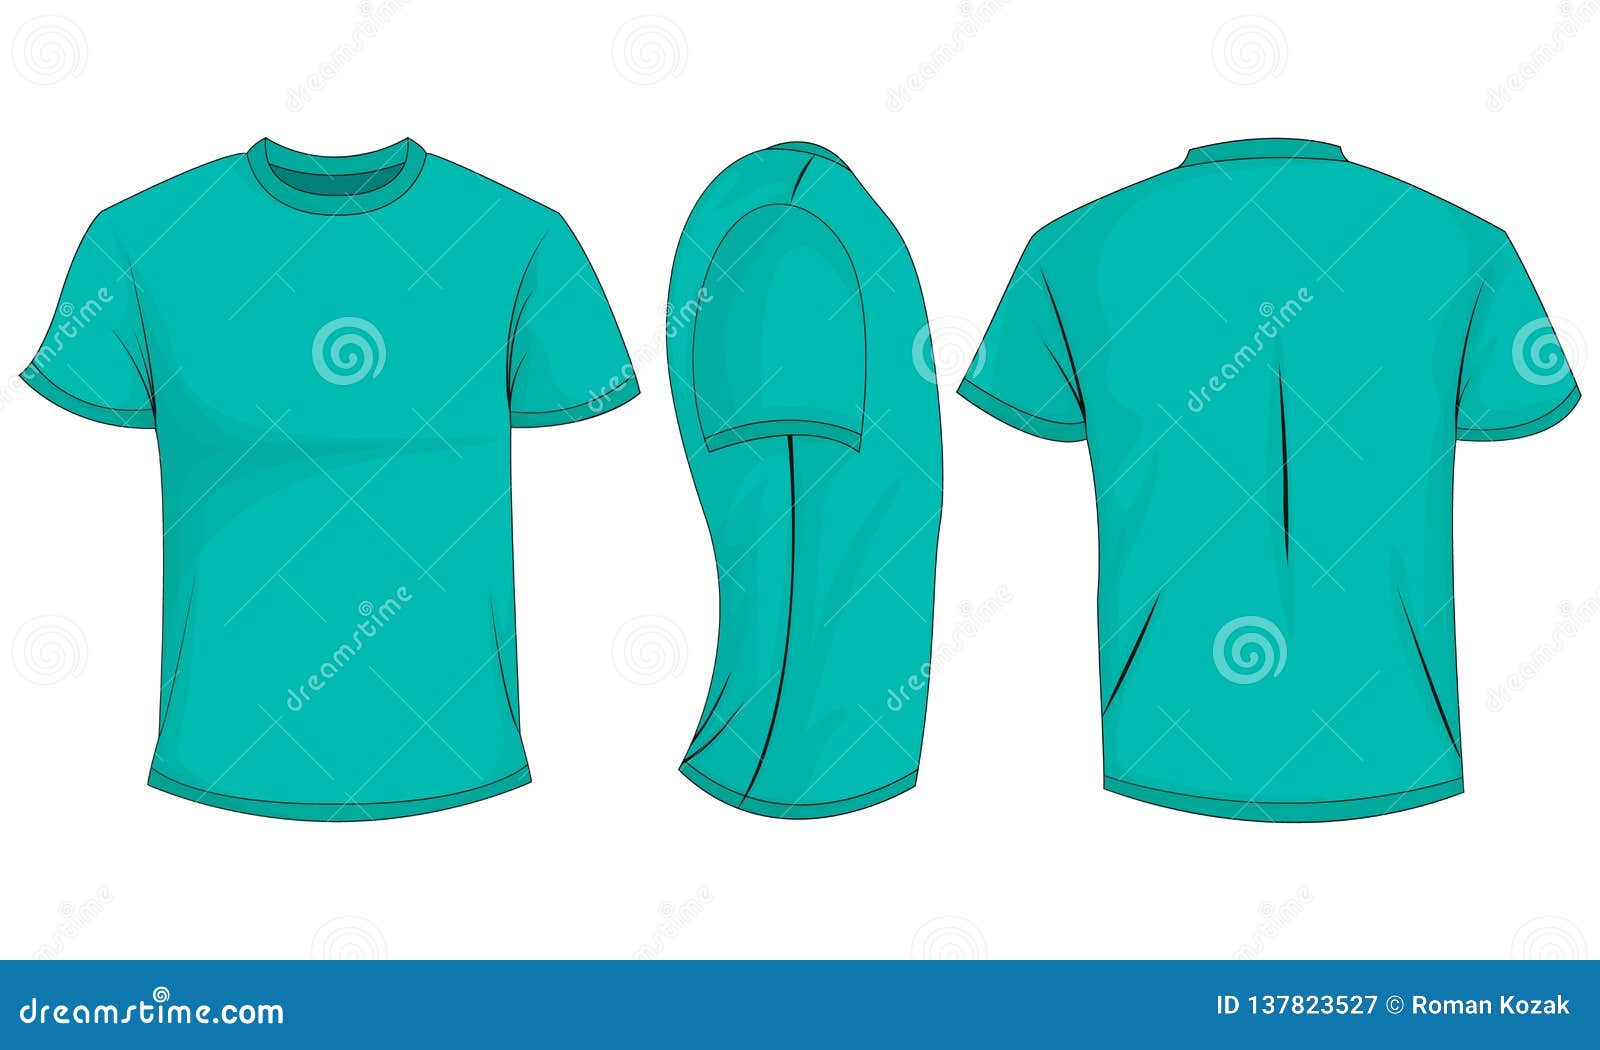 Download Turquoise Mens T-shirt With Short Sleeves. Front, Back ...